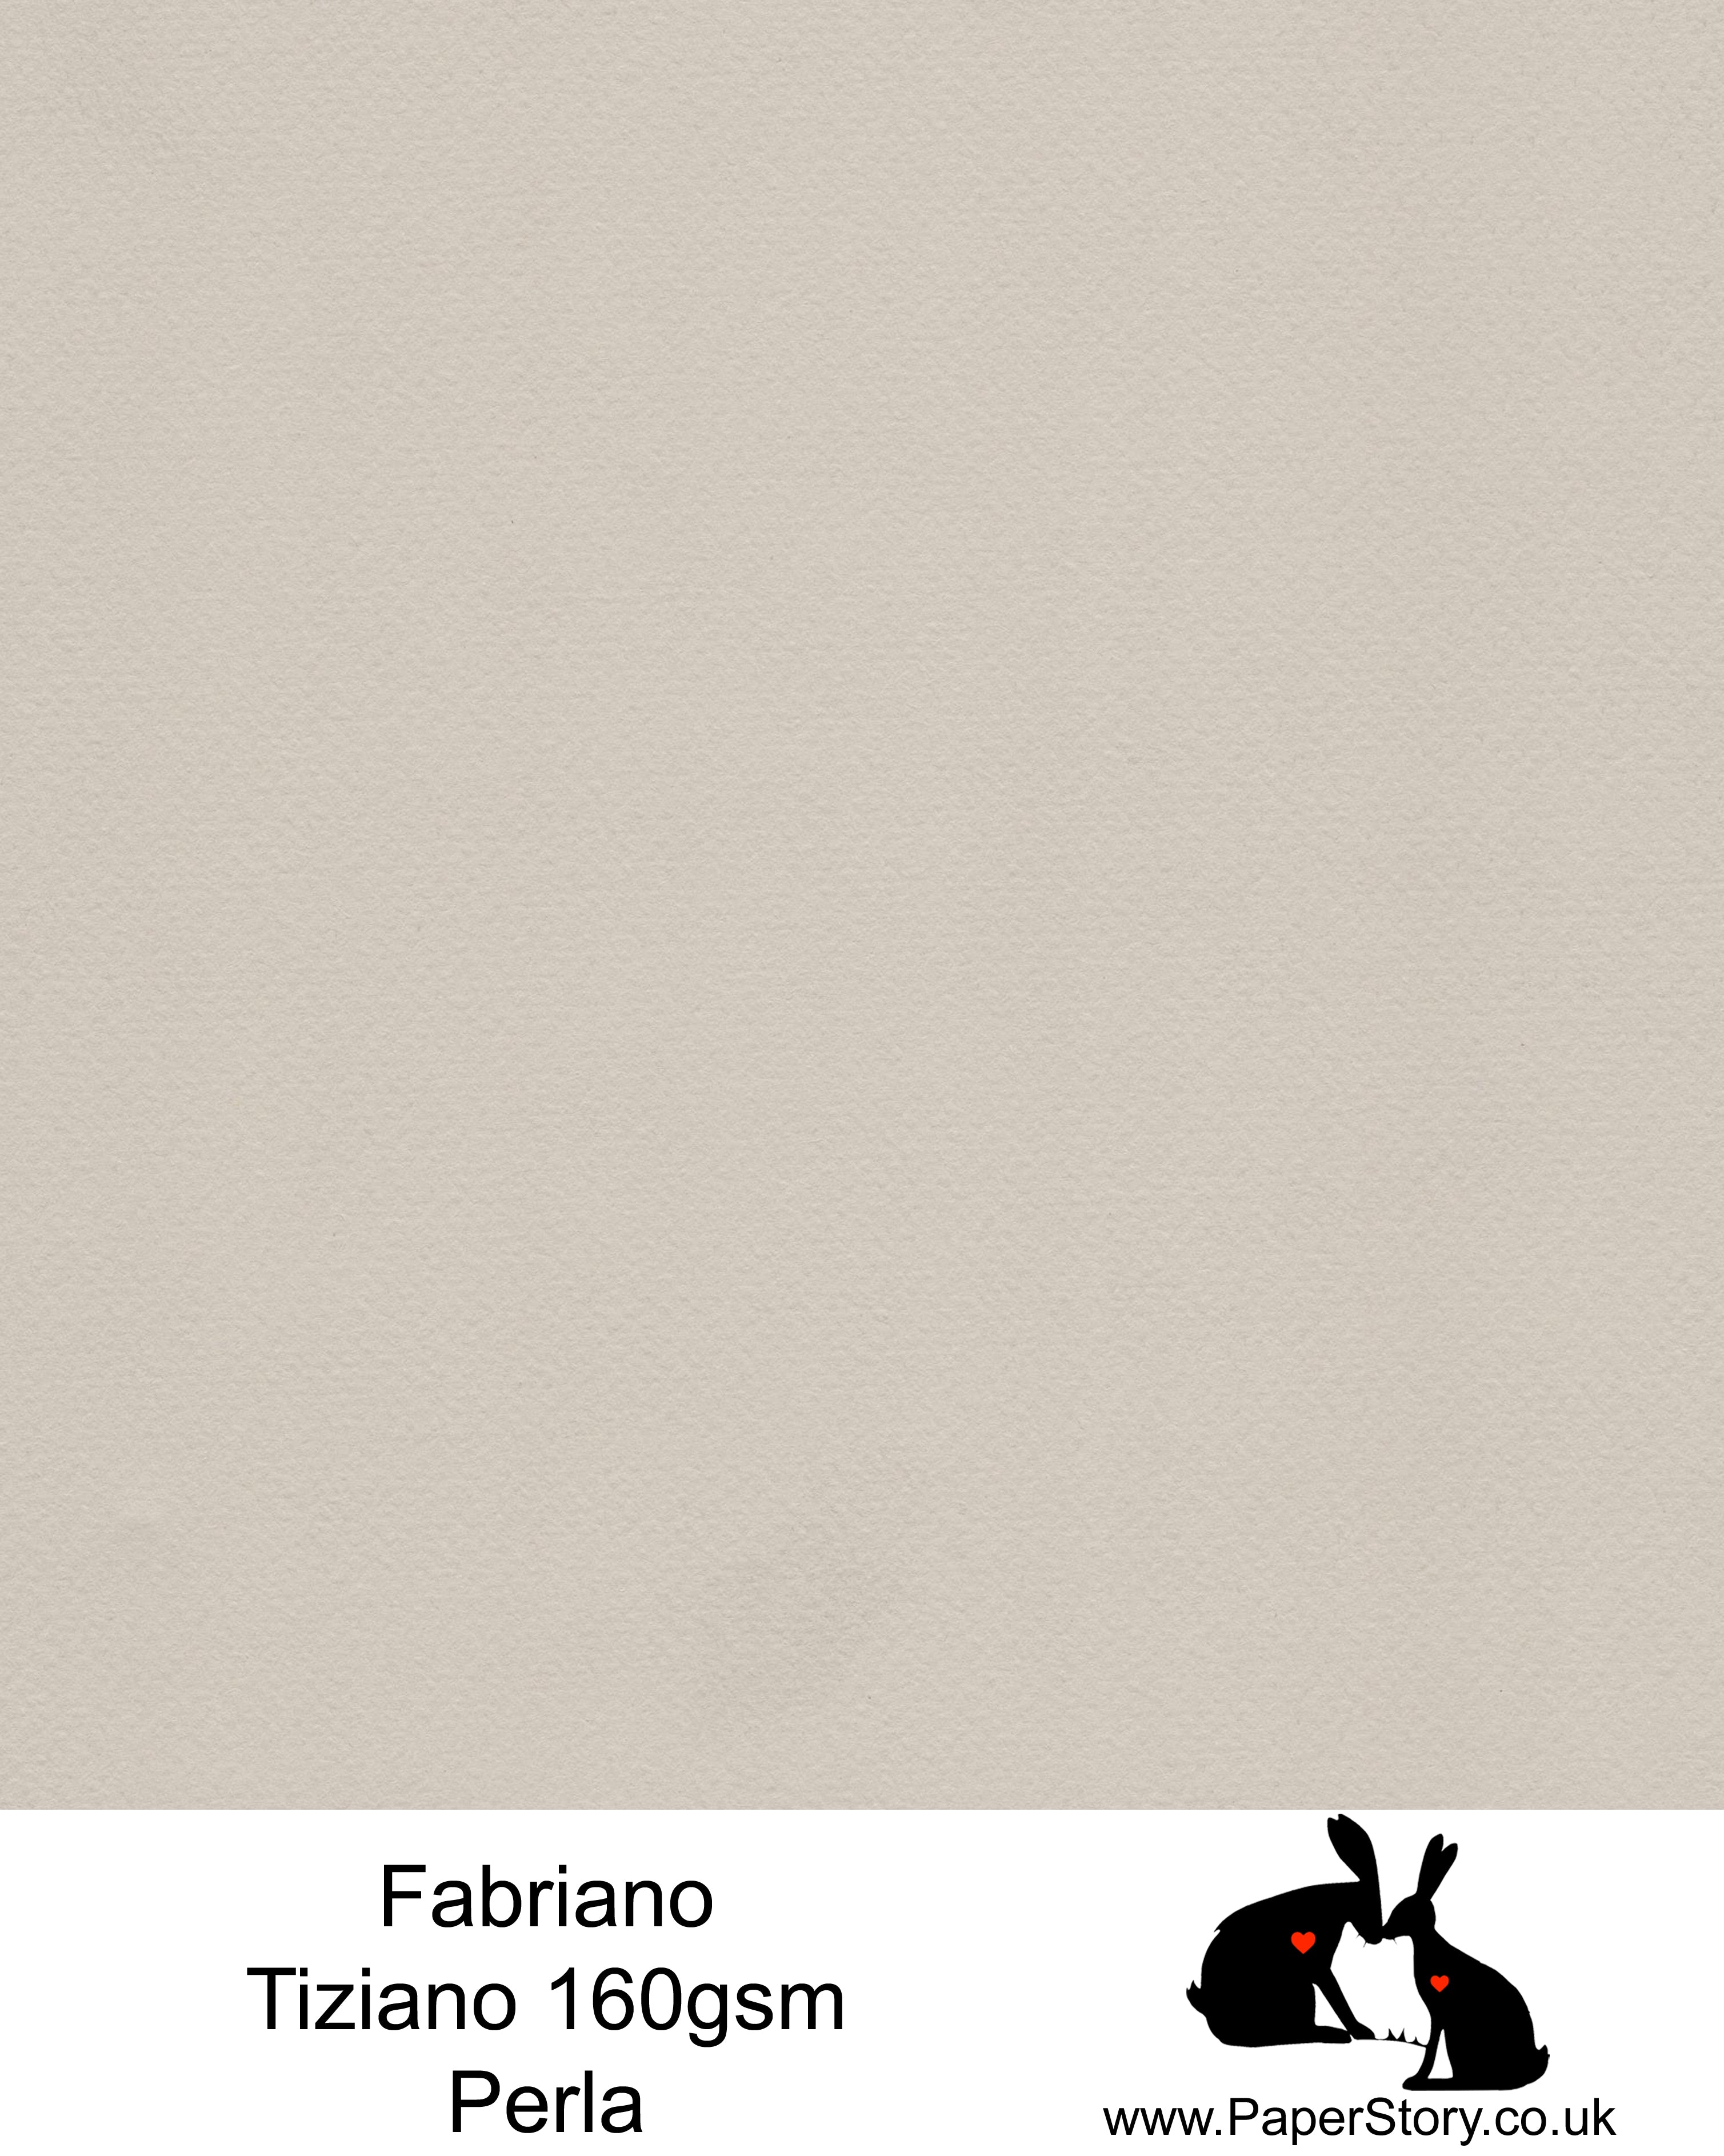 High quality paper from Italy, Perla mid tone grey Fabriano Tiziano is 160 gsm, Tiziano has a high cotton content, a textured naturally sized surface. This paper is acid free to guarantee long permanence in time, pH neutral. It has highly lightfast colours, an excellent surface making and sizing which make this paper particularly suitable for papercutting, pastels, pencil, graphite, charcoal, tempera, air brush and watercolour techniques. Tiziano can be used for all printing techniques.